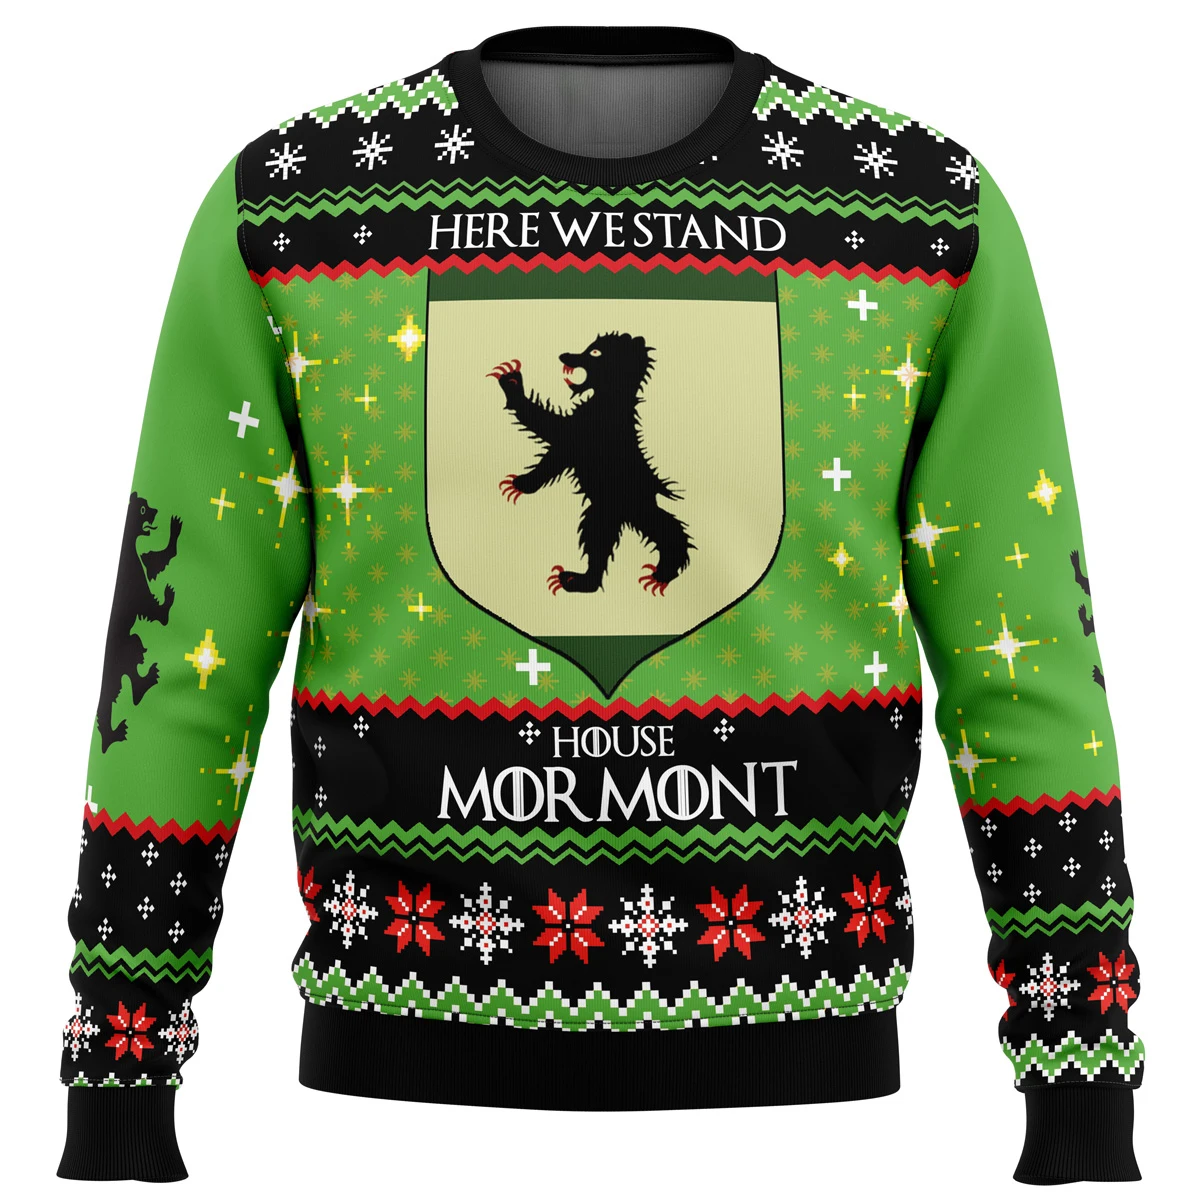 Game Of Thrones Christmas Is Coming Ugly Christmas Sweatshirt Gift Santa Claus Pullover Autumn Winter Men 12 - Game Of Thrones Shop